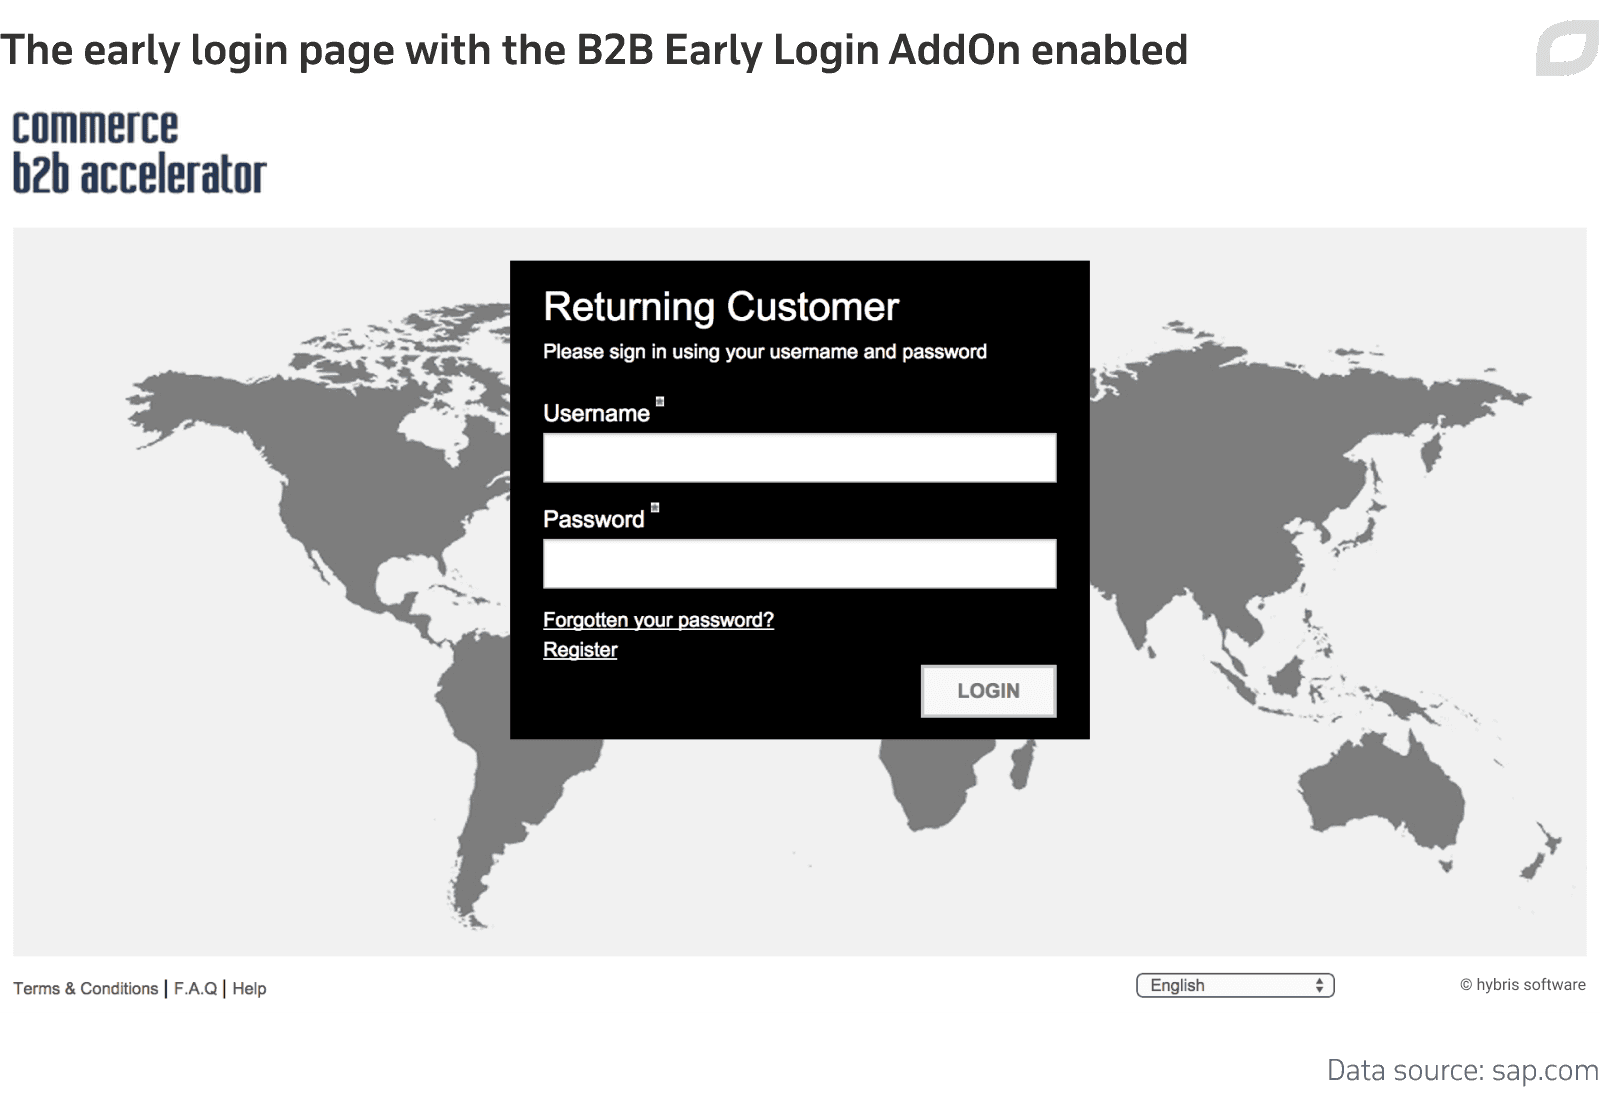 The early login page with the B2B Early Login AddOn enabled